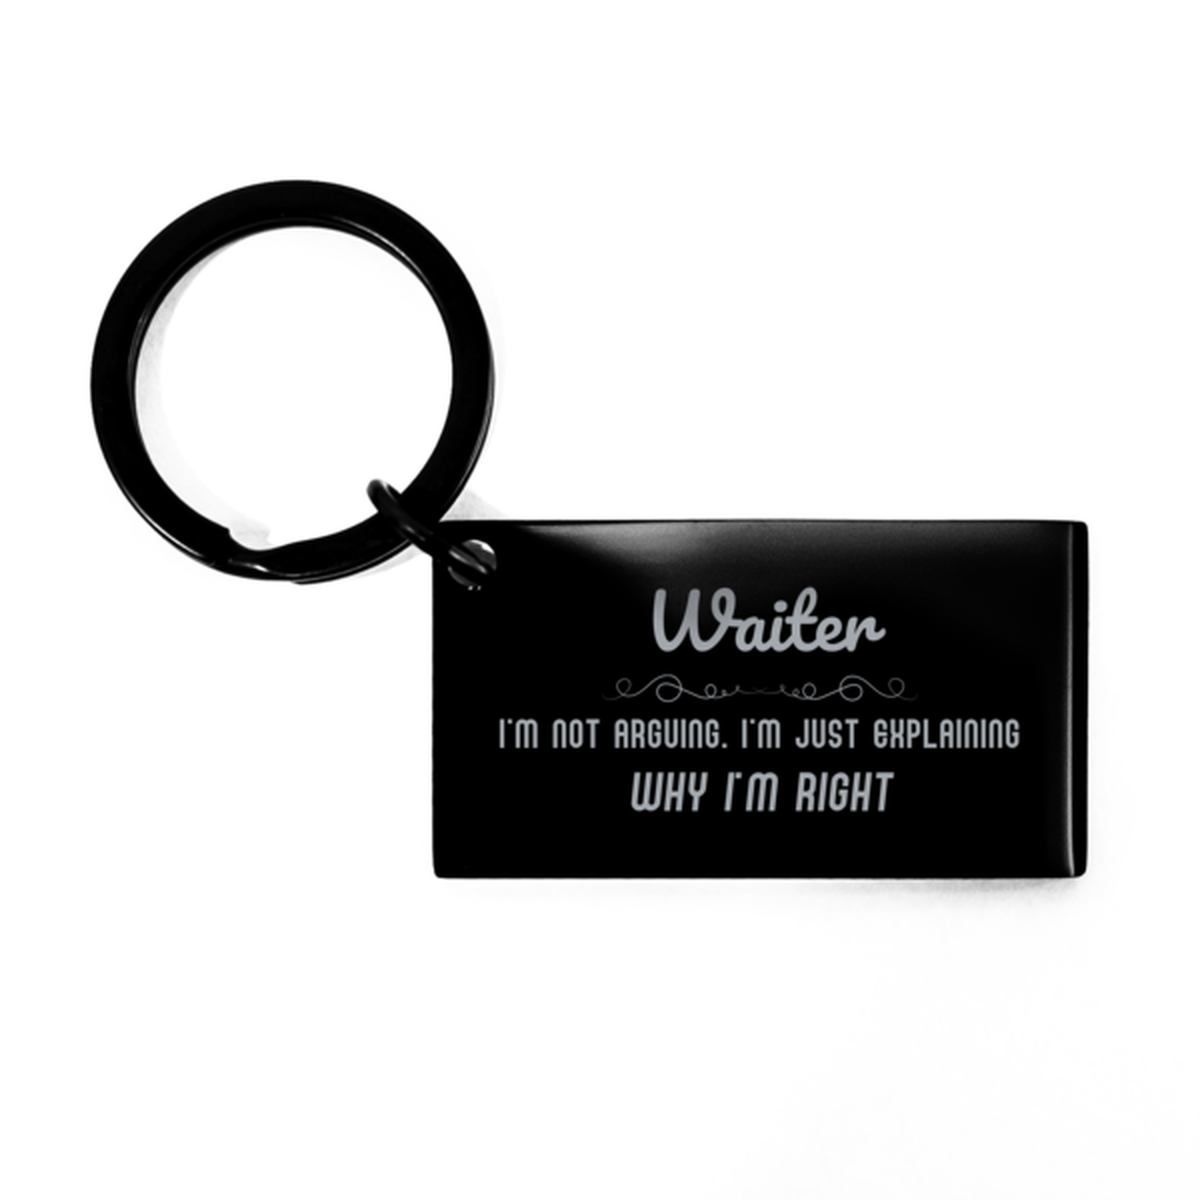 Waiter I'm not Arguing. I'm Just Explaining Why I'm RIGHT Keychain, Funny Saying Quote Waiter Gifts For Waiter Graduation Birthday Christmas Gifts for Men Women Coworker